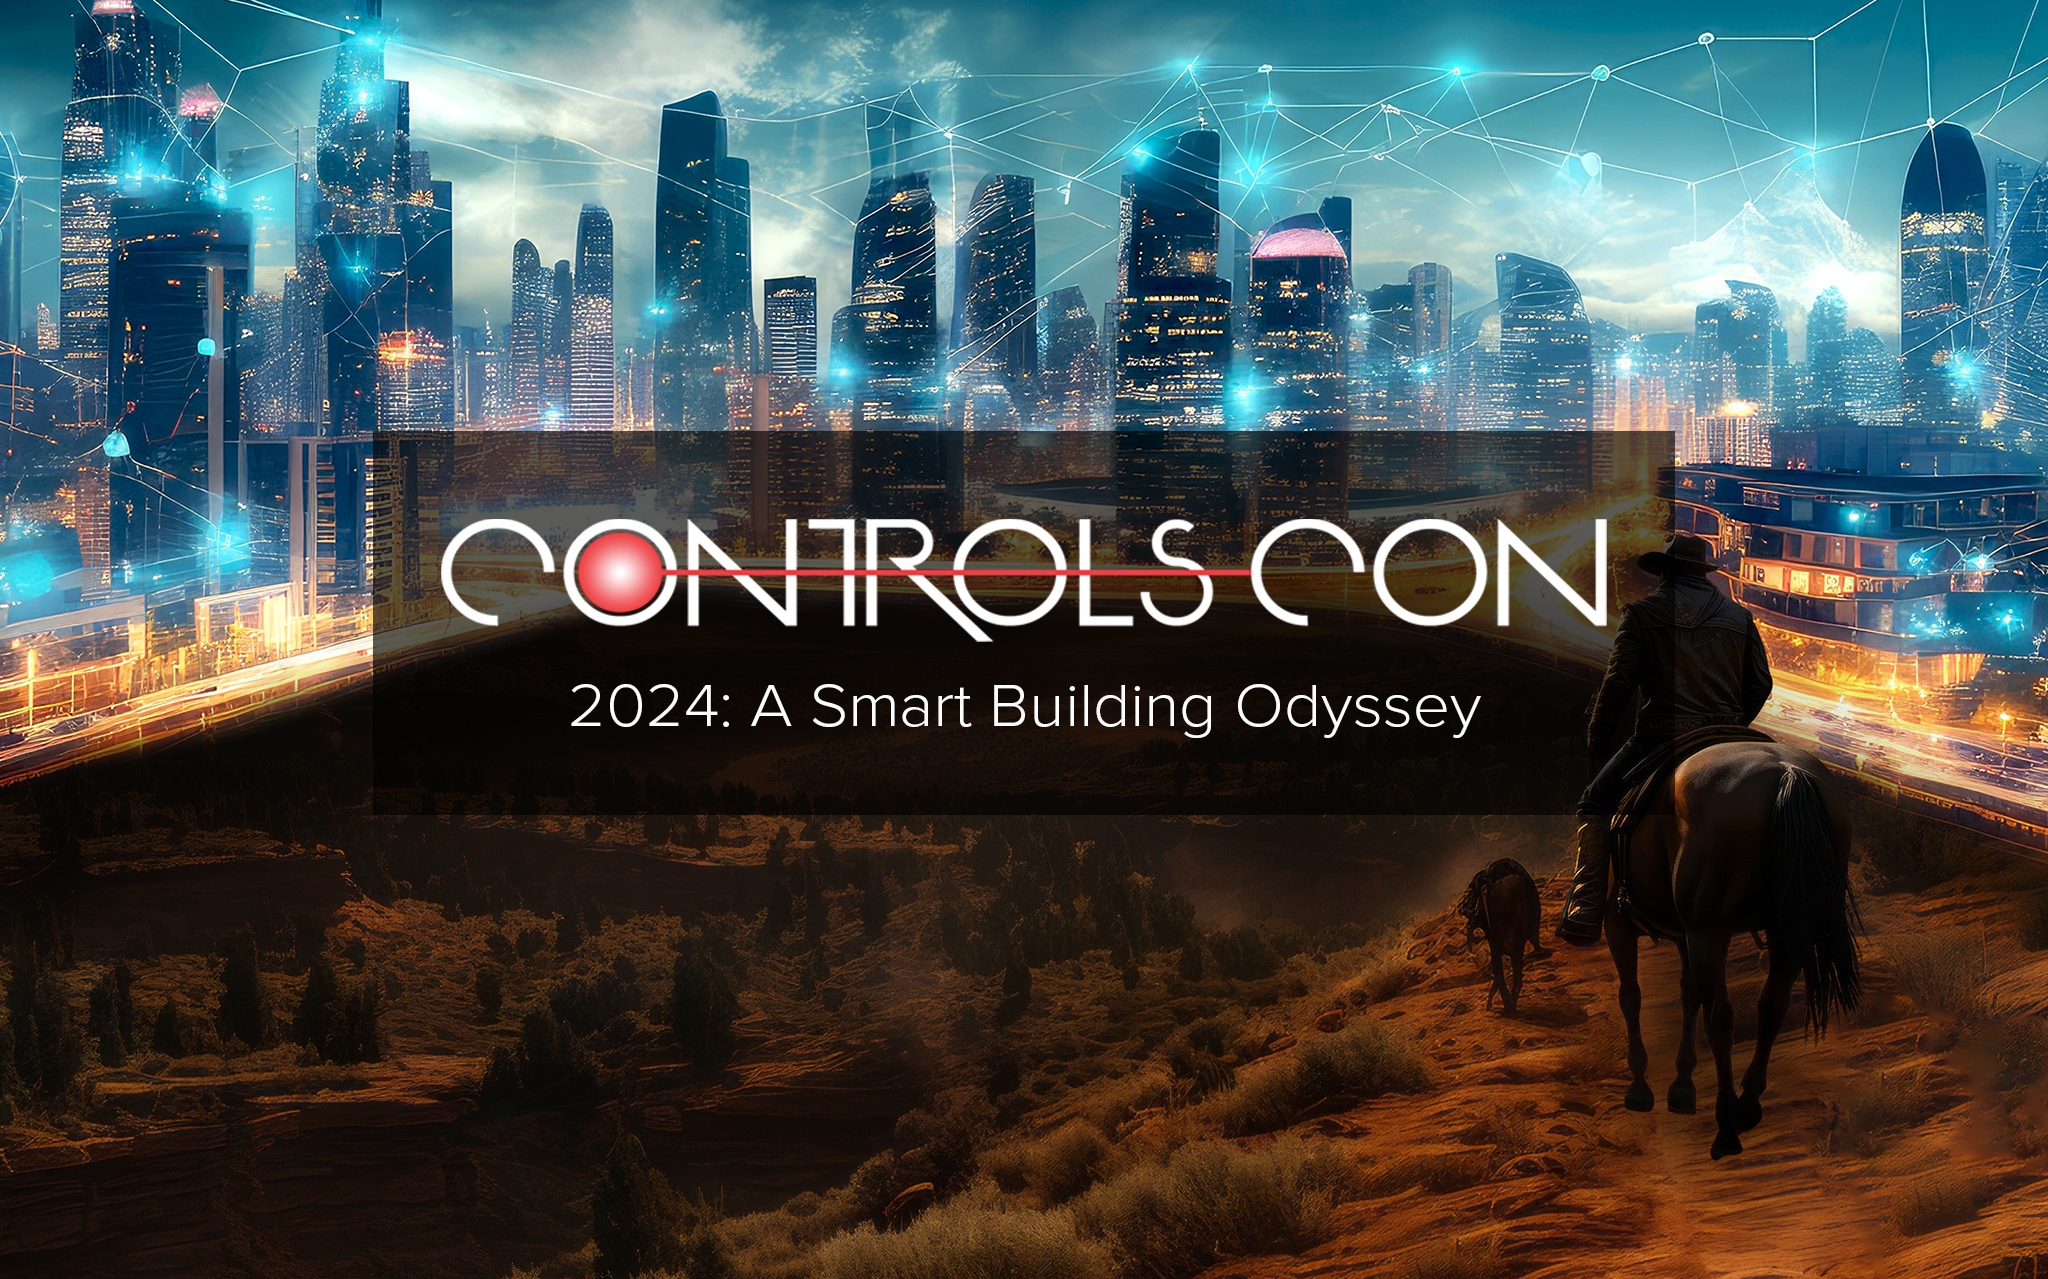 controls-con 2024 banner showing smart buildings of the future